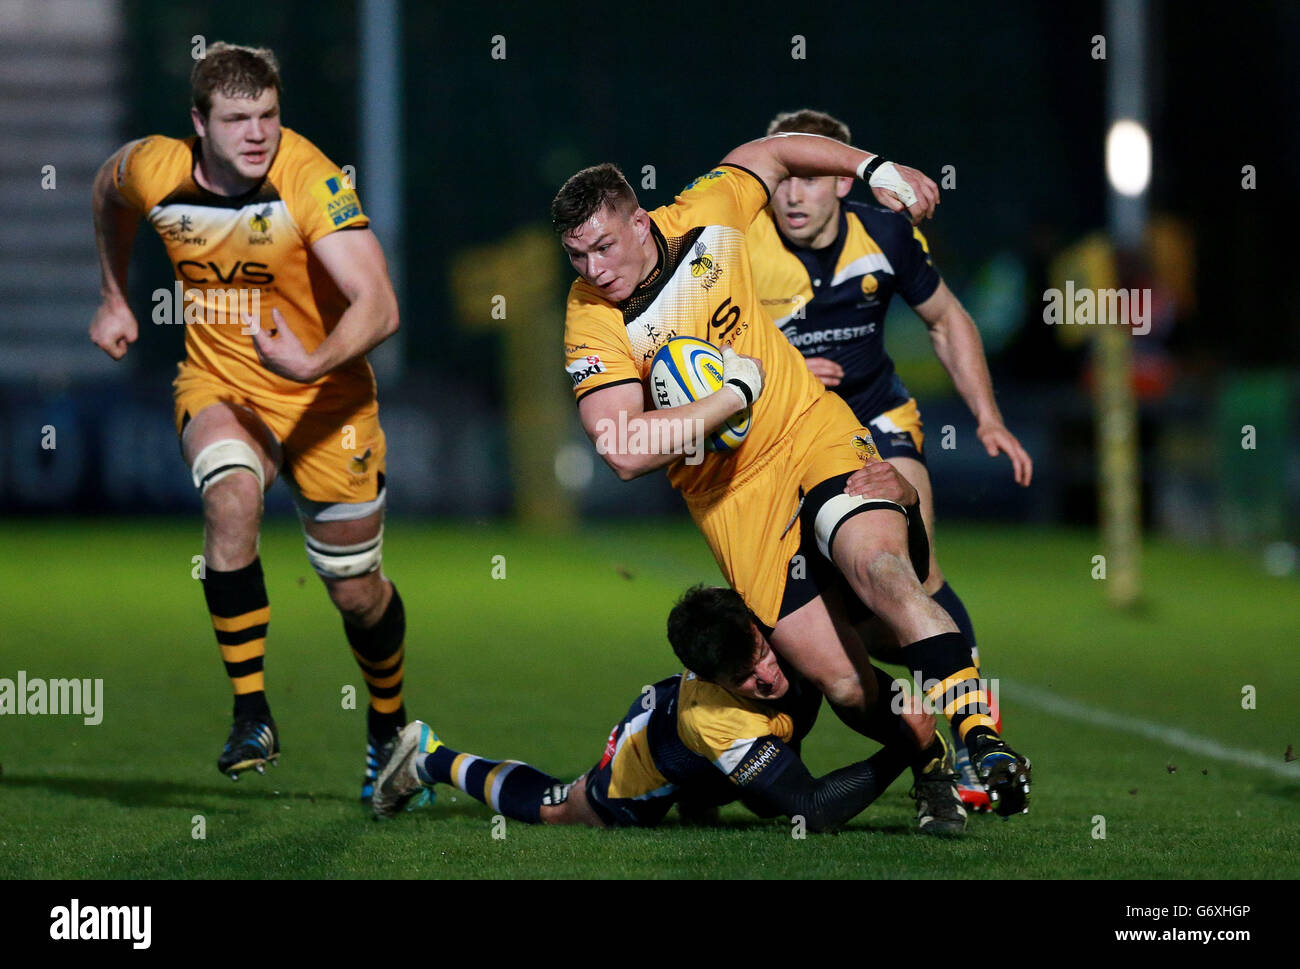 Wasps Tom Lindsay is tackled by Worcester's Jonny Arr during the Aviva Premiership match at Sixways Stadium, Worcester. Stock Photo